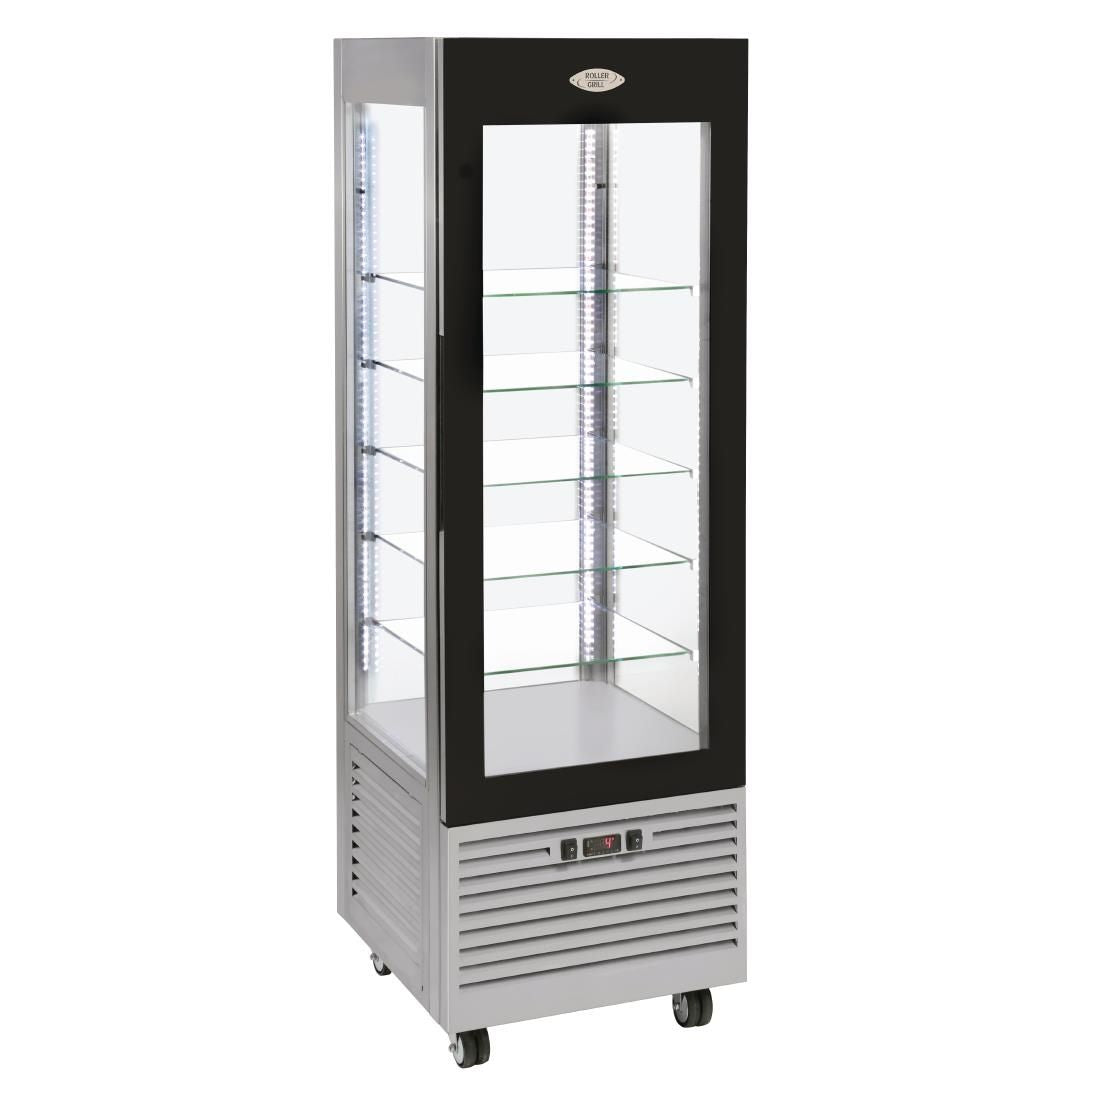 DT733 Roller Grill Display Fridge with Fixed Shelves